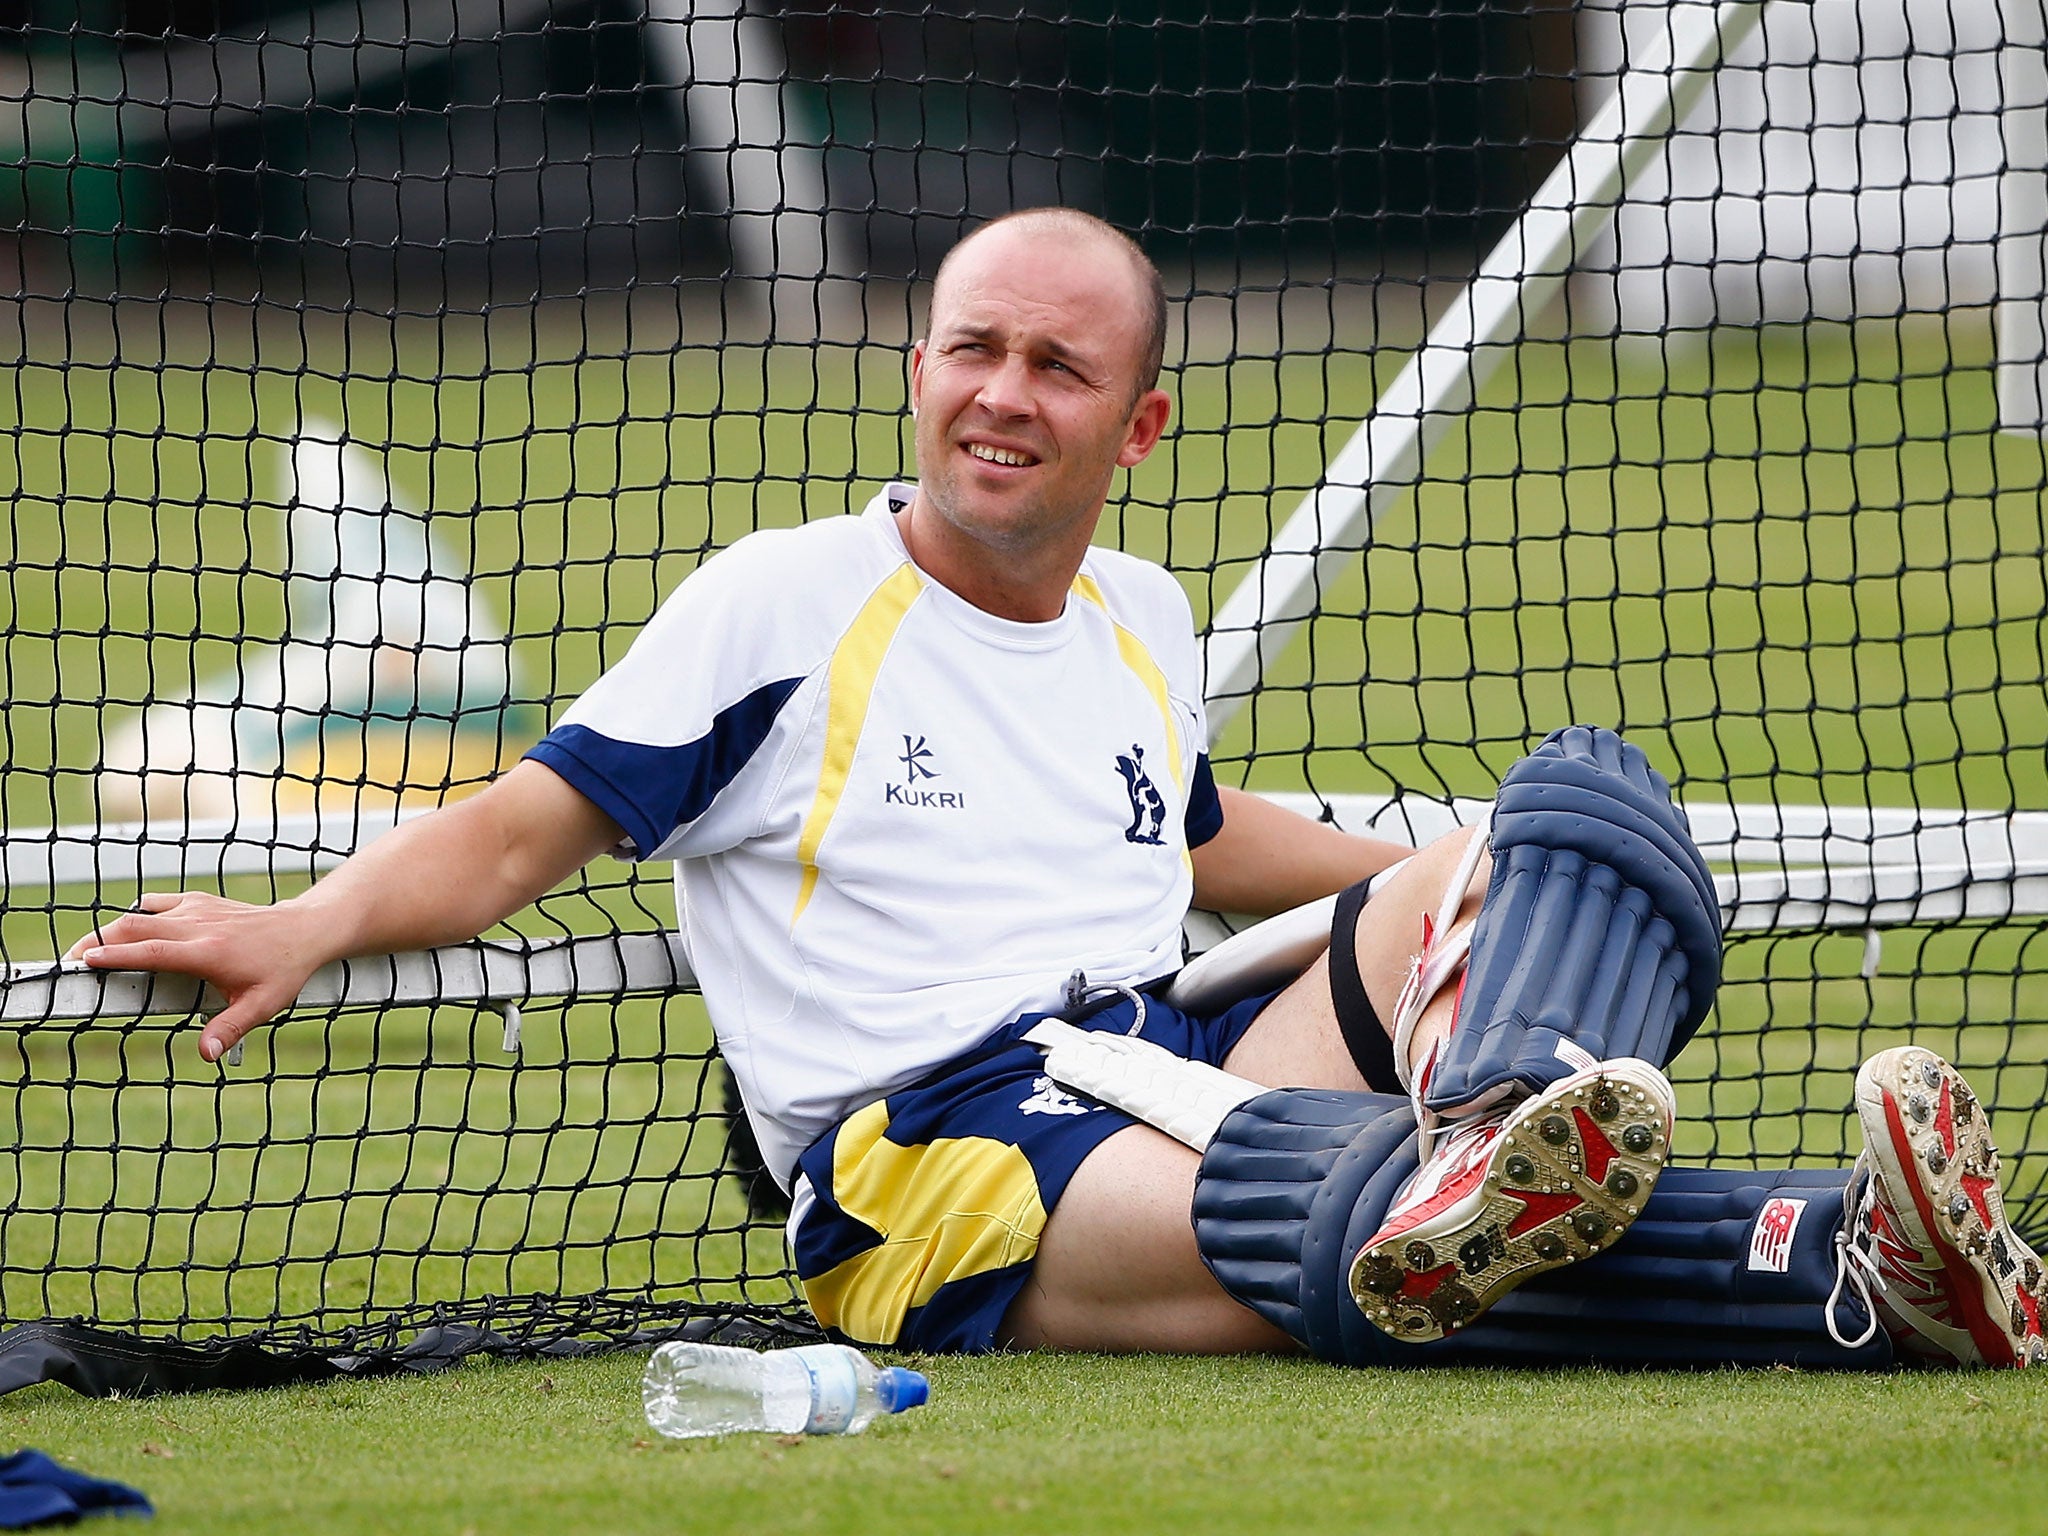 Trott relaxes in training during a session with Warwickshire